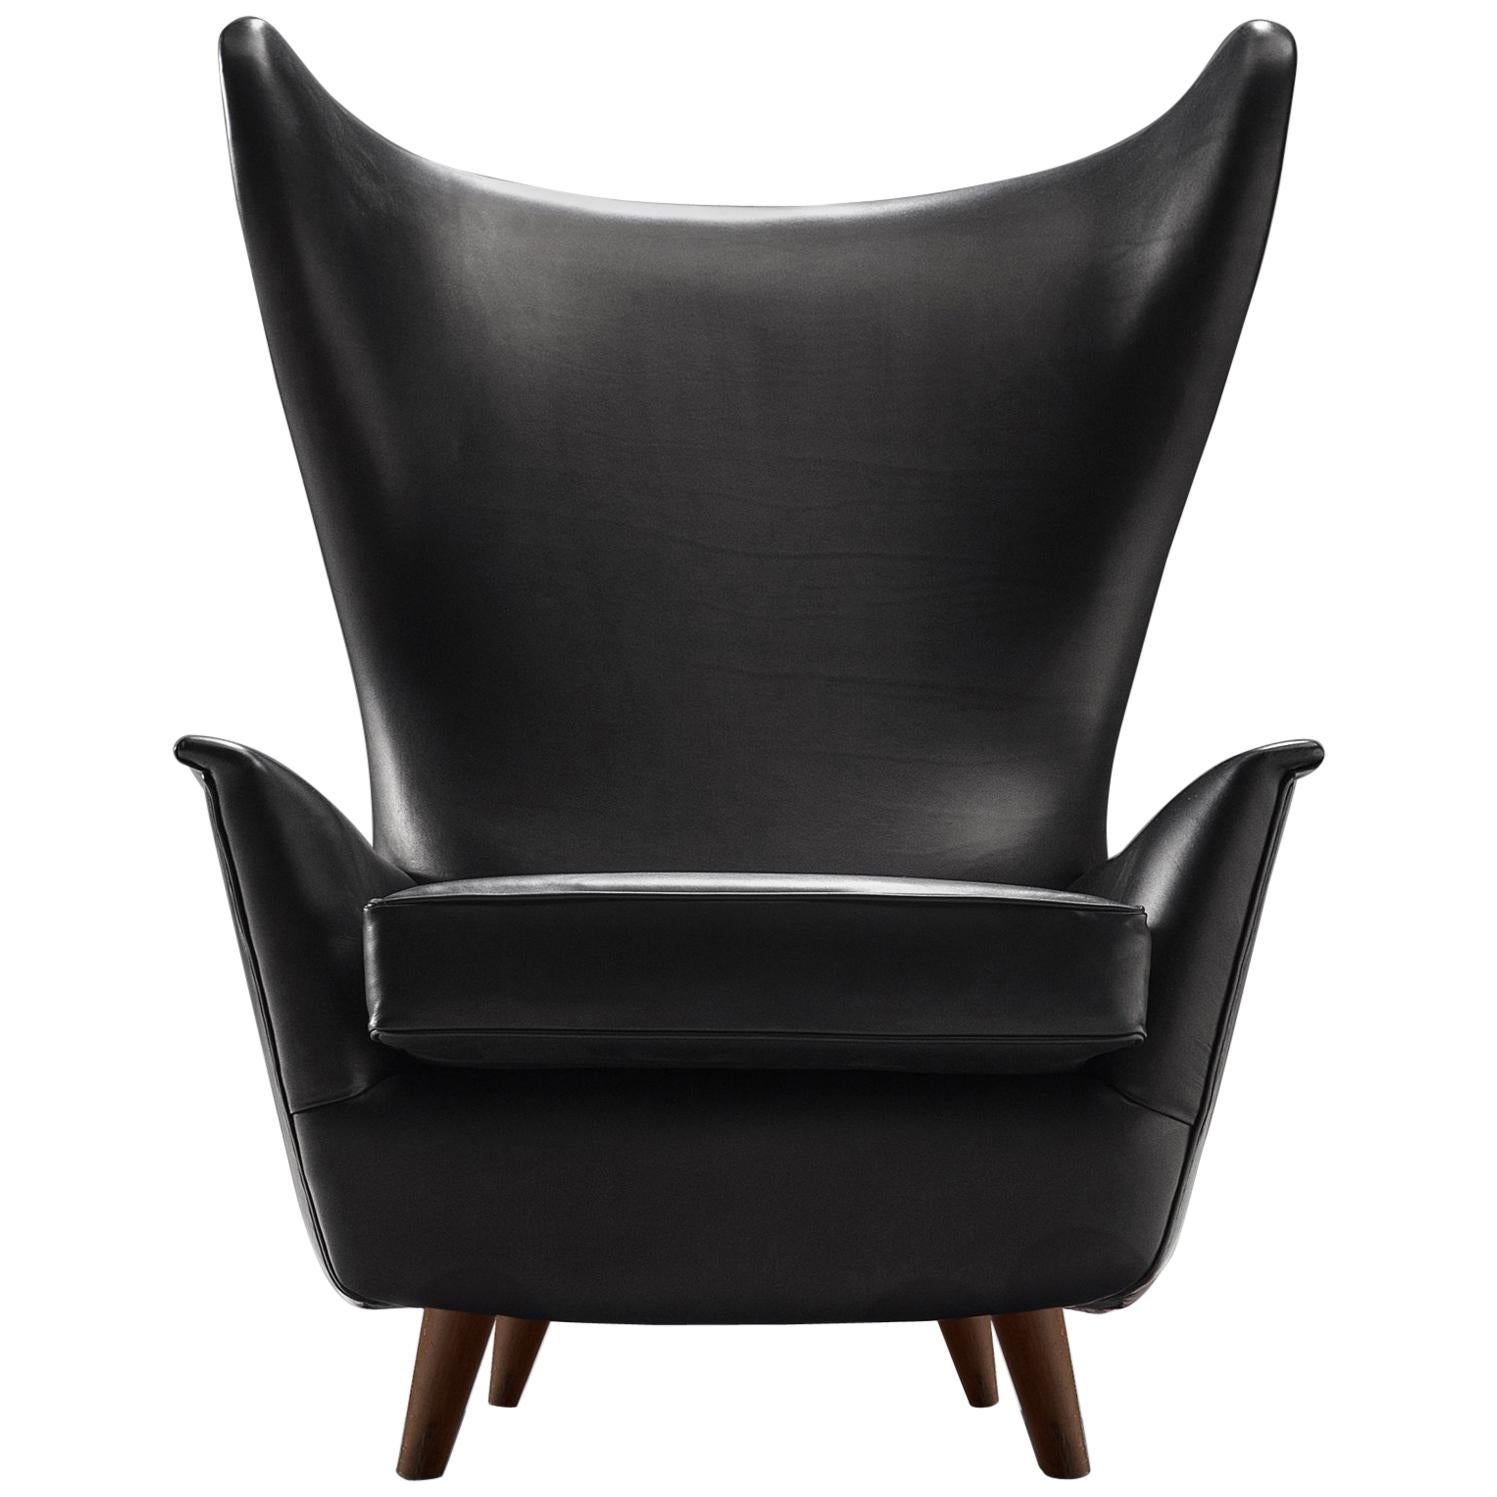 Grand Italian Wingback Chair Reupholstered in Black Analine Leather